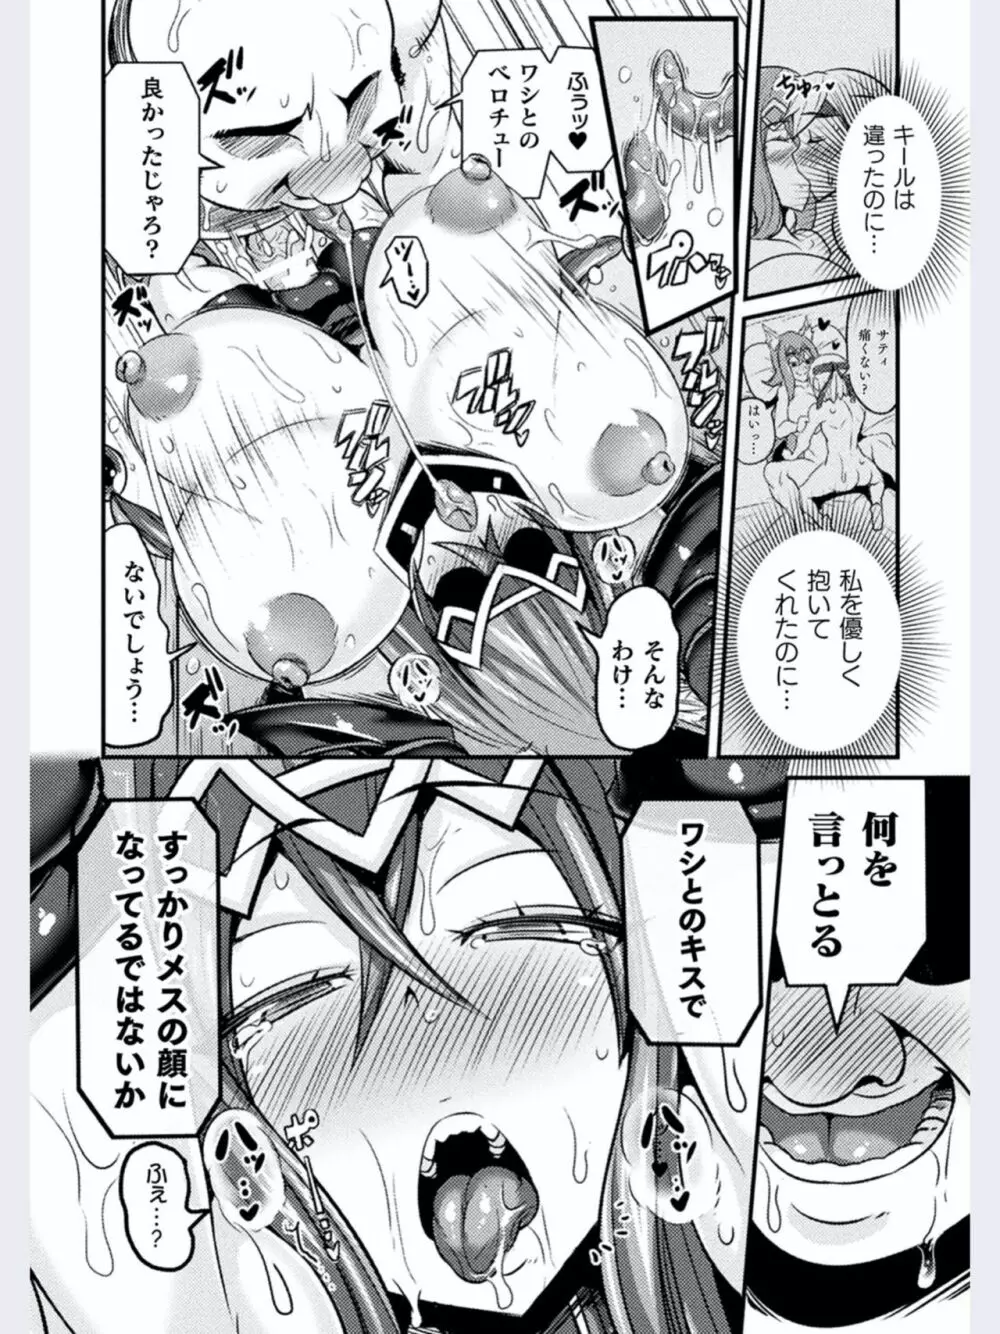 LOVE METER〜寝取られた相棒〜 #1 Page.18